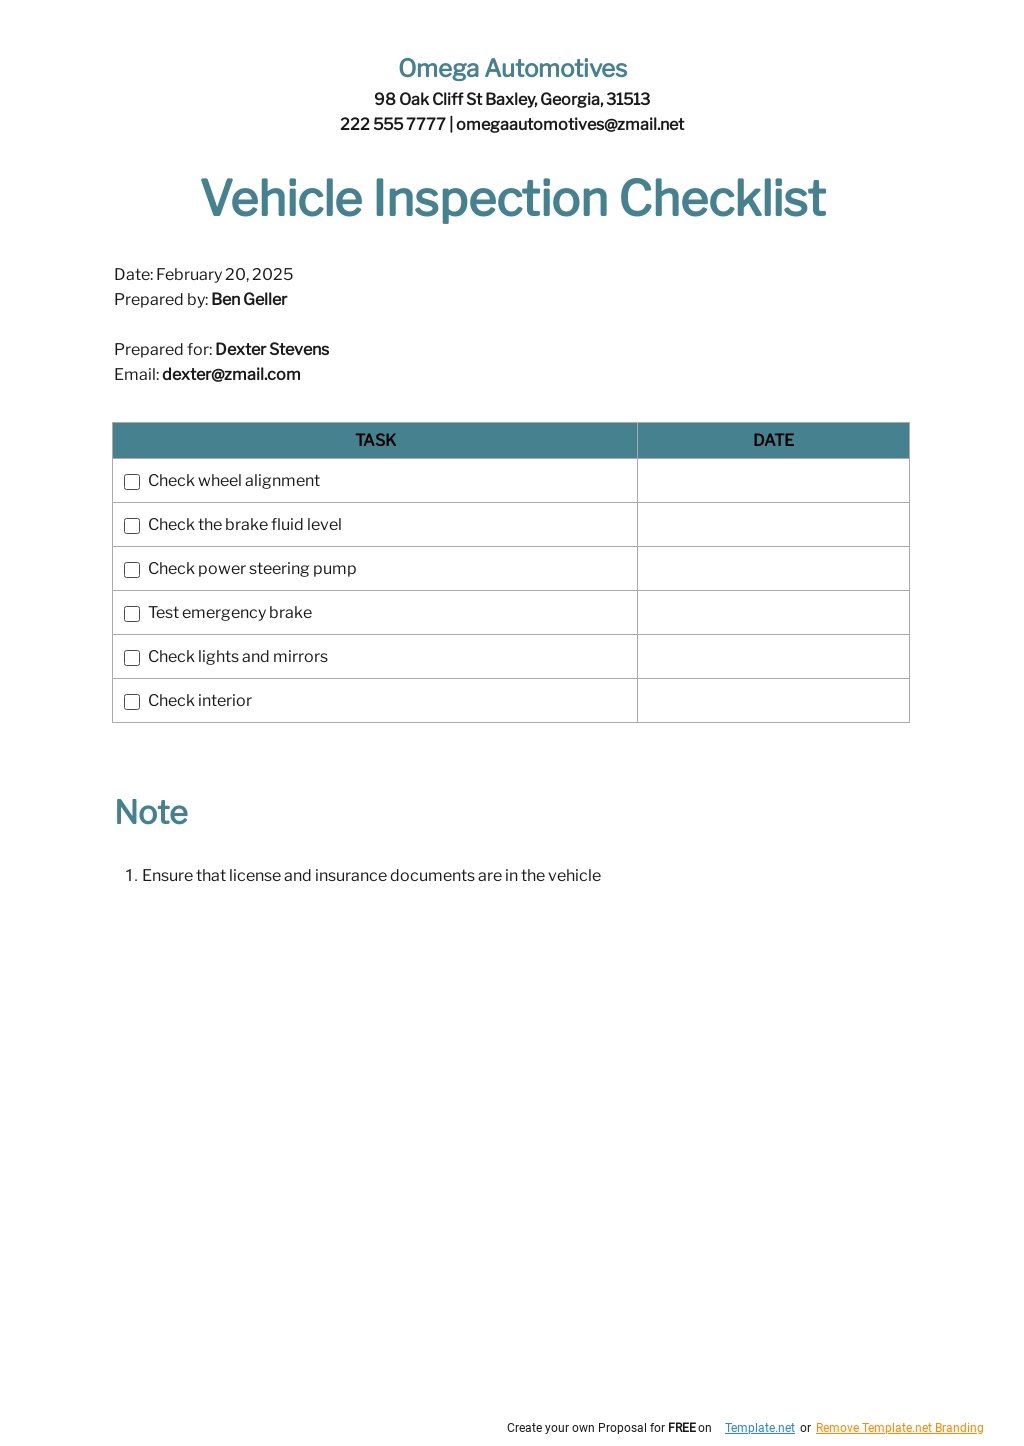 Vehicle Inspection Checklist Template - Google Docs, Word Pertaining To Vehicle Checklist Template Word